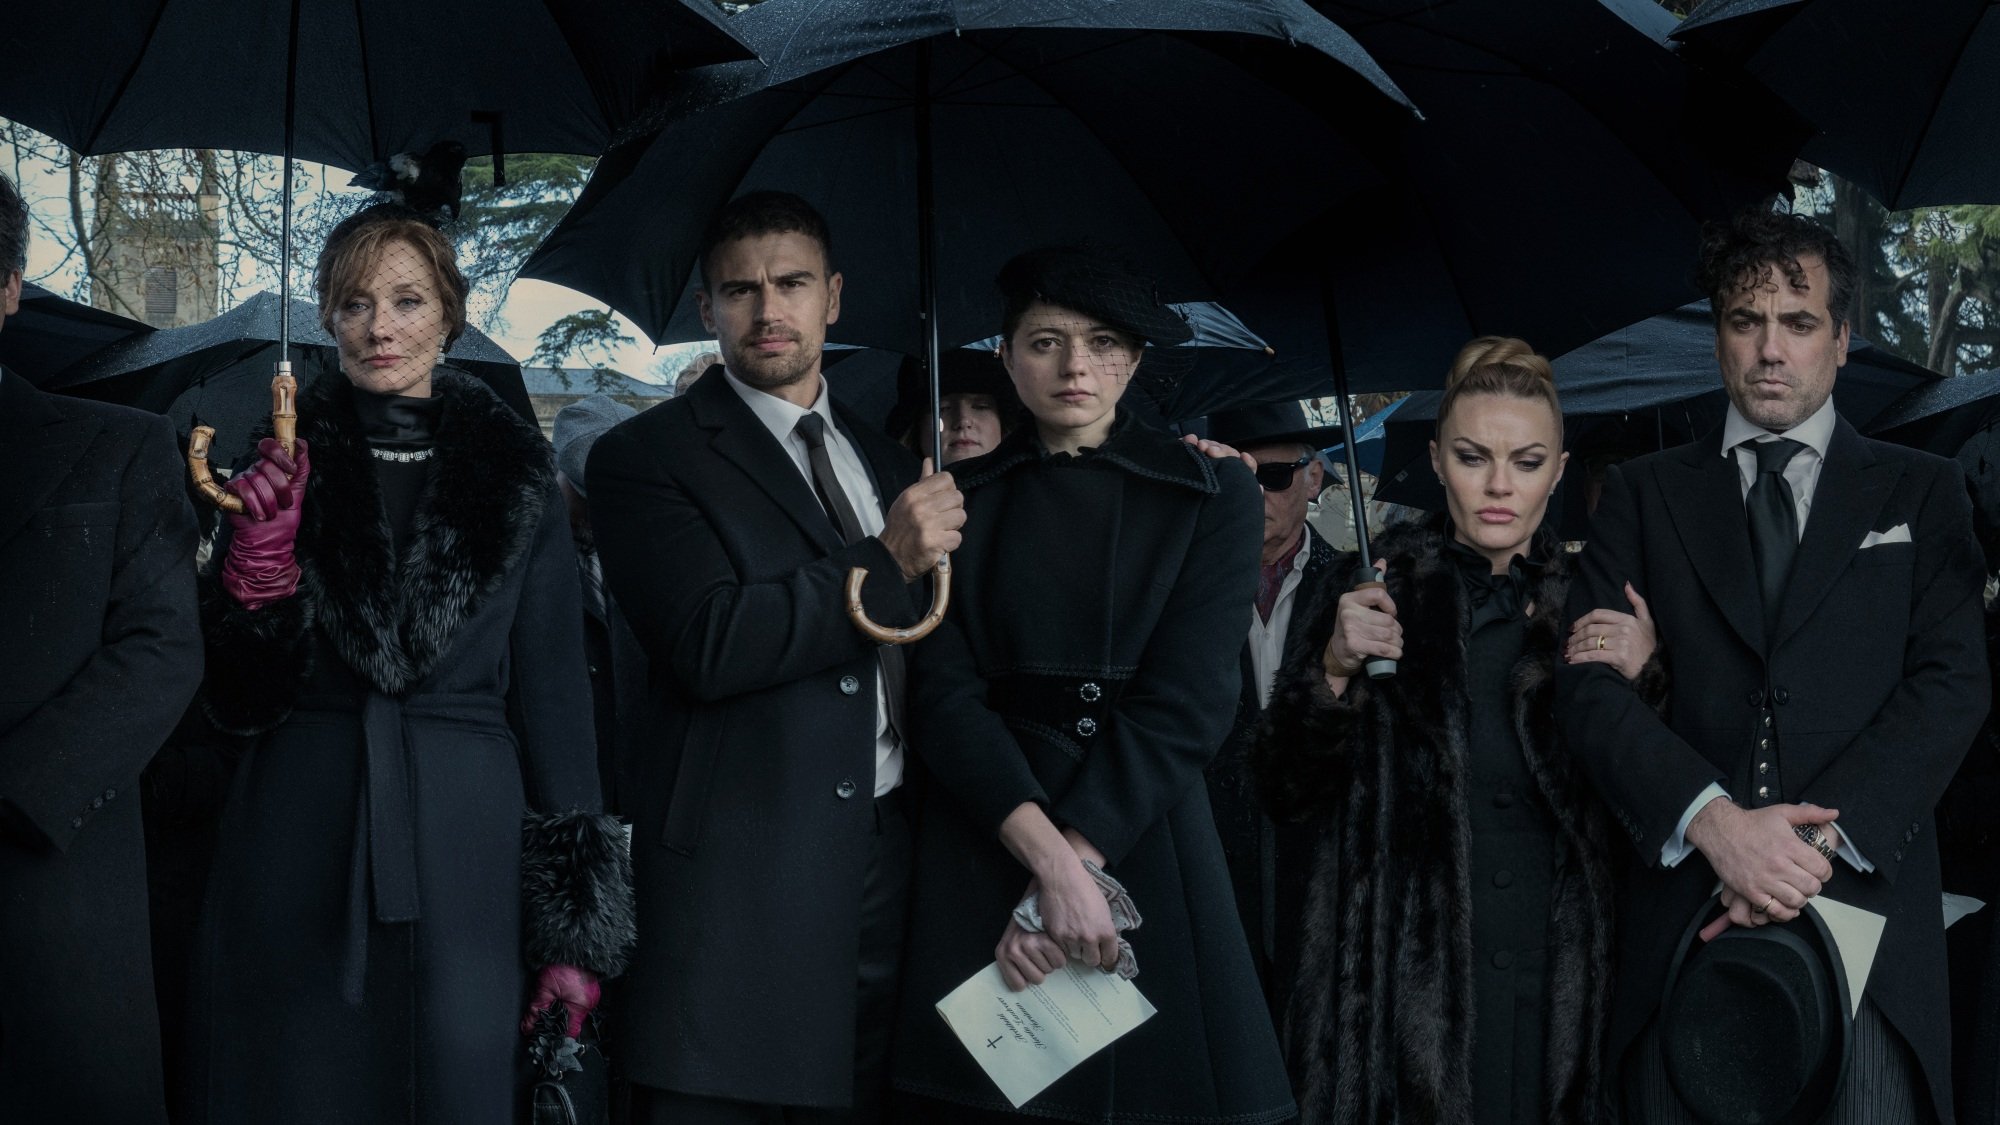 A group of men and women in black funeral attire, holding black umbrellas.